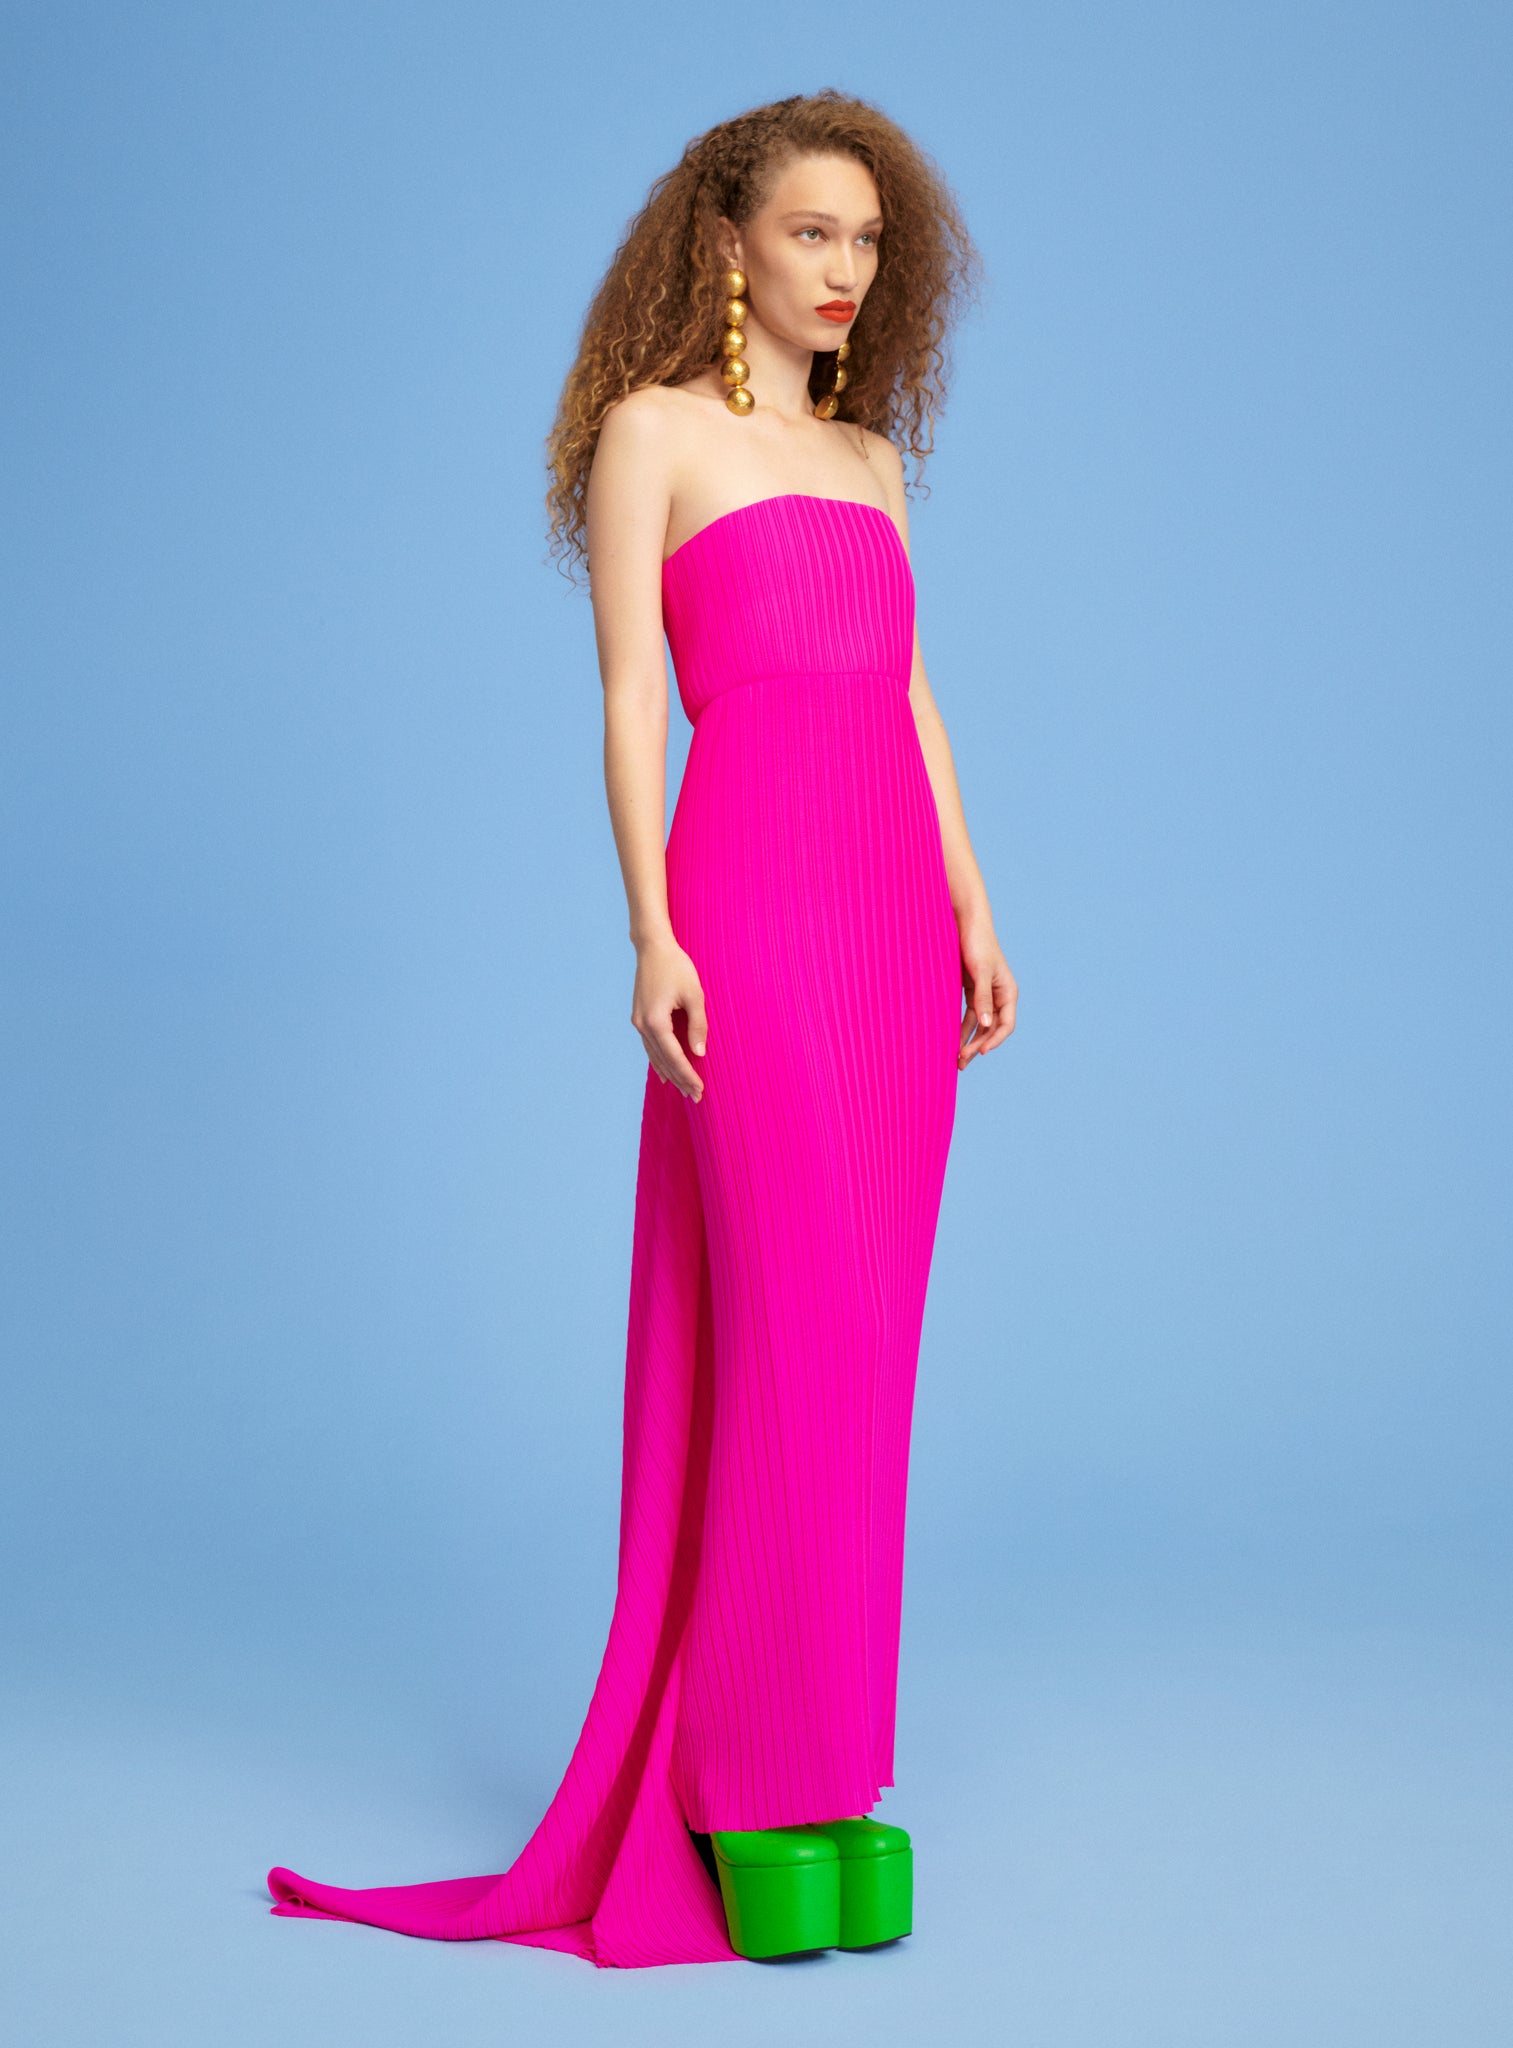 The Harlee Maxi Dress in Hot Pink